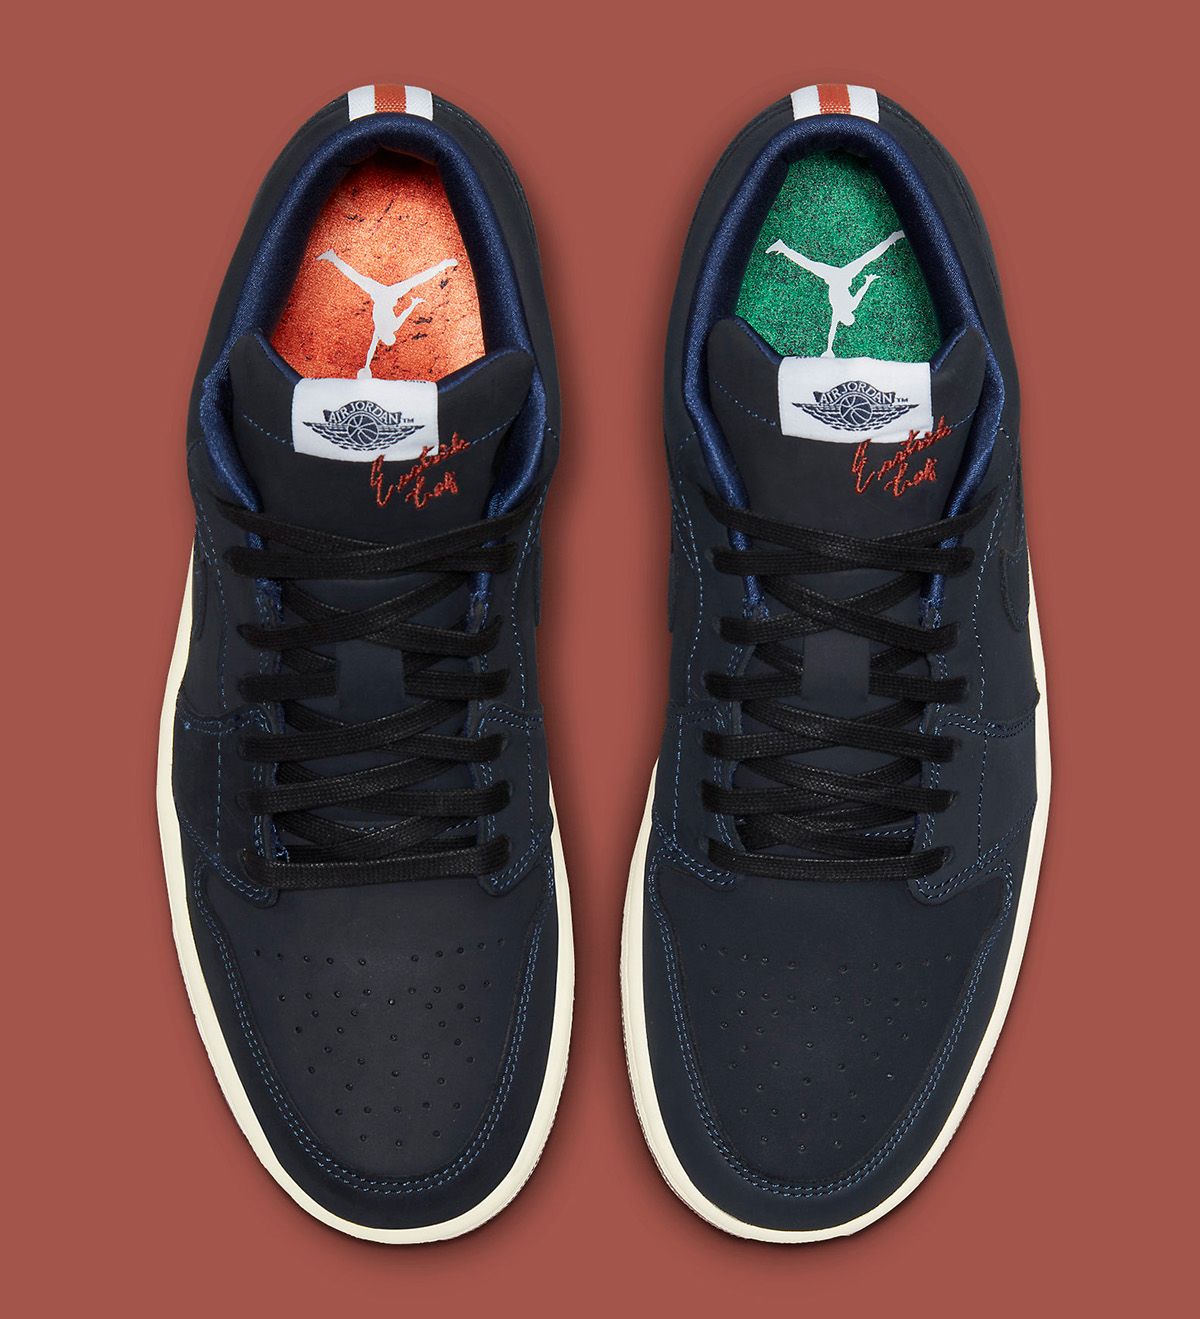 Where to Buy the Eastside Golf x Air Jordan 1 Low | House of Heat°